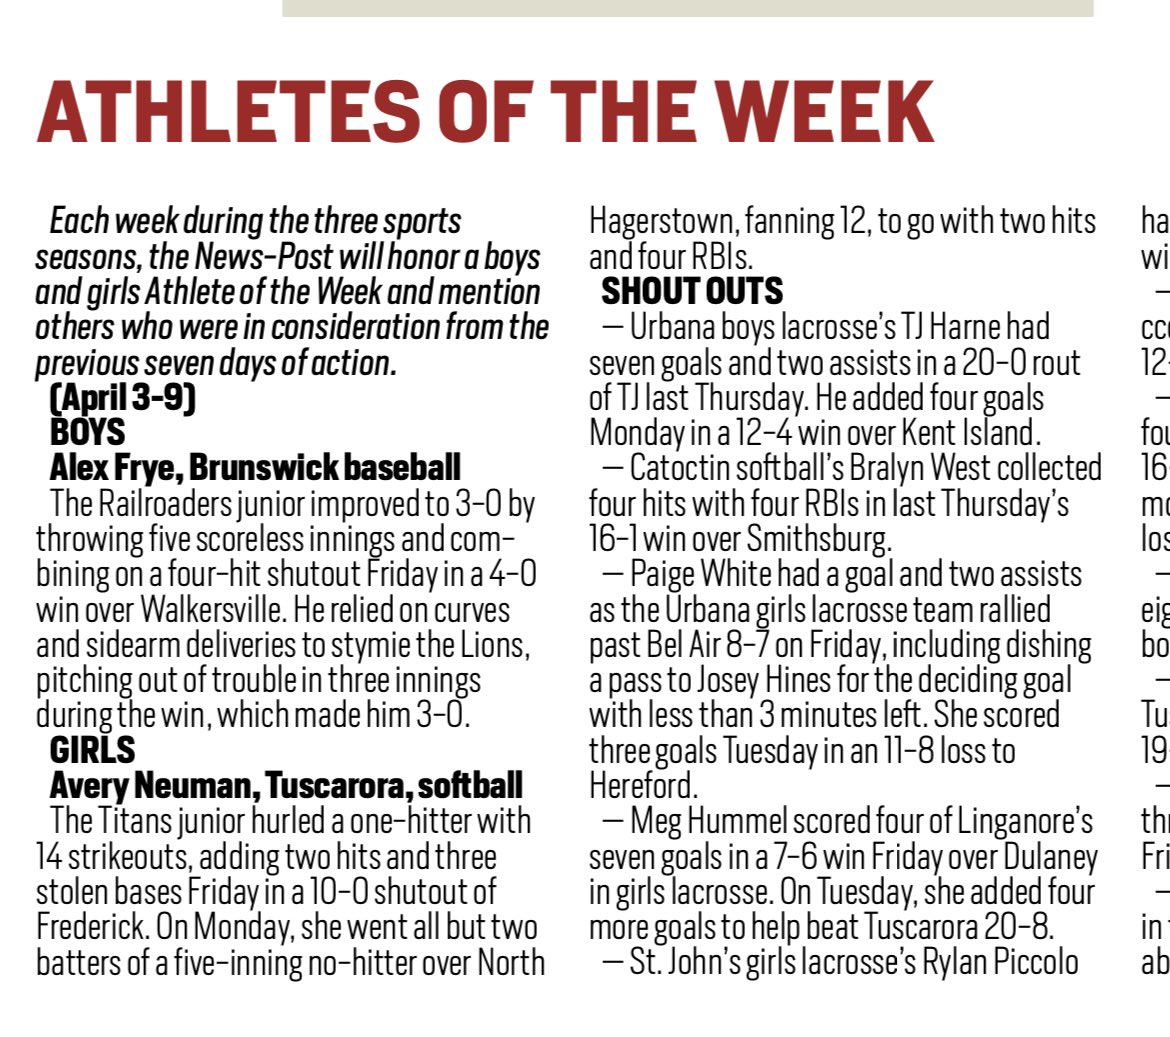 Congrats to Avery on being named FNP athlete of the week! 💚🖤 @AveryANeuman @LisaSmithFCPS @THSTitans